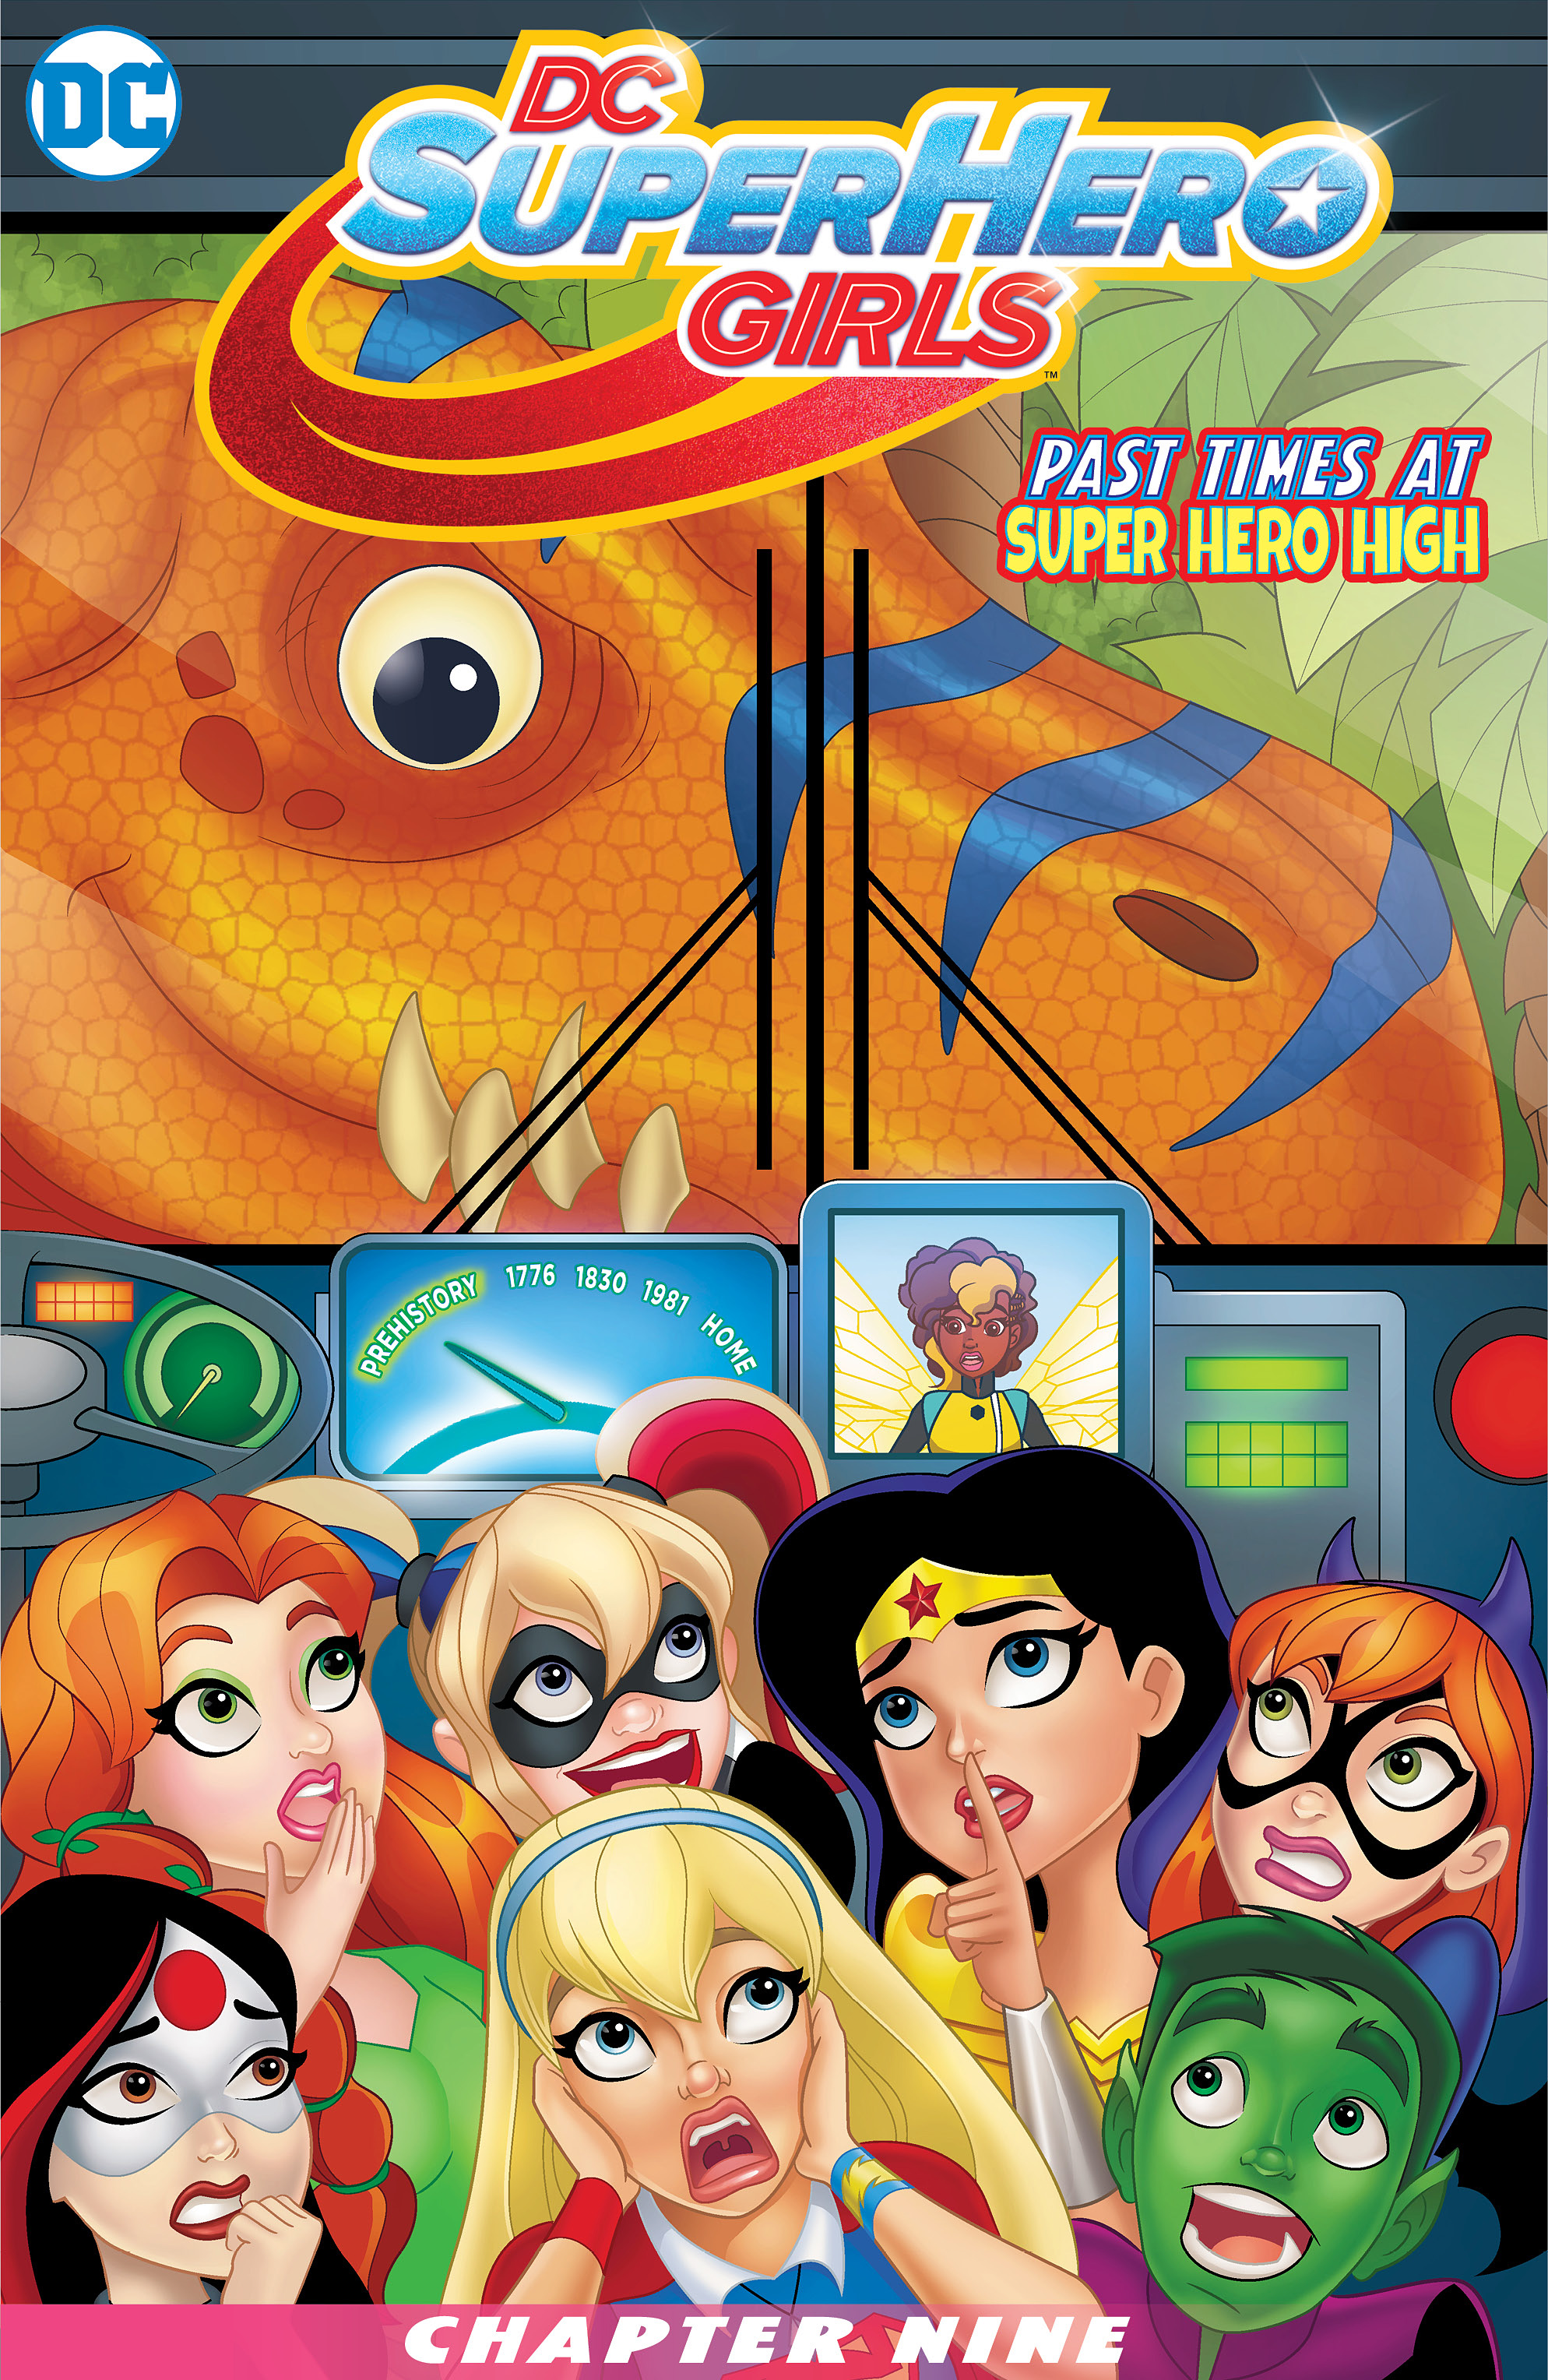 DC Super Hero Girls (2016-): Chapter 9 - Page 2